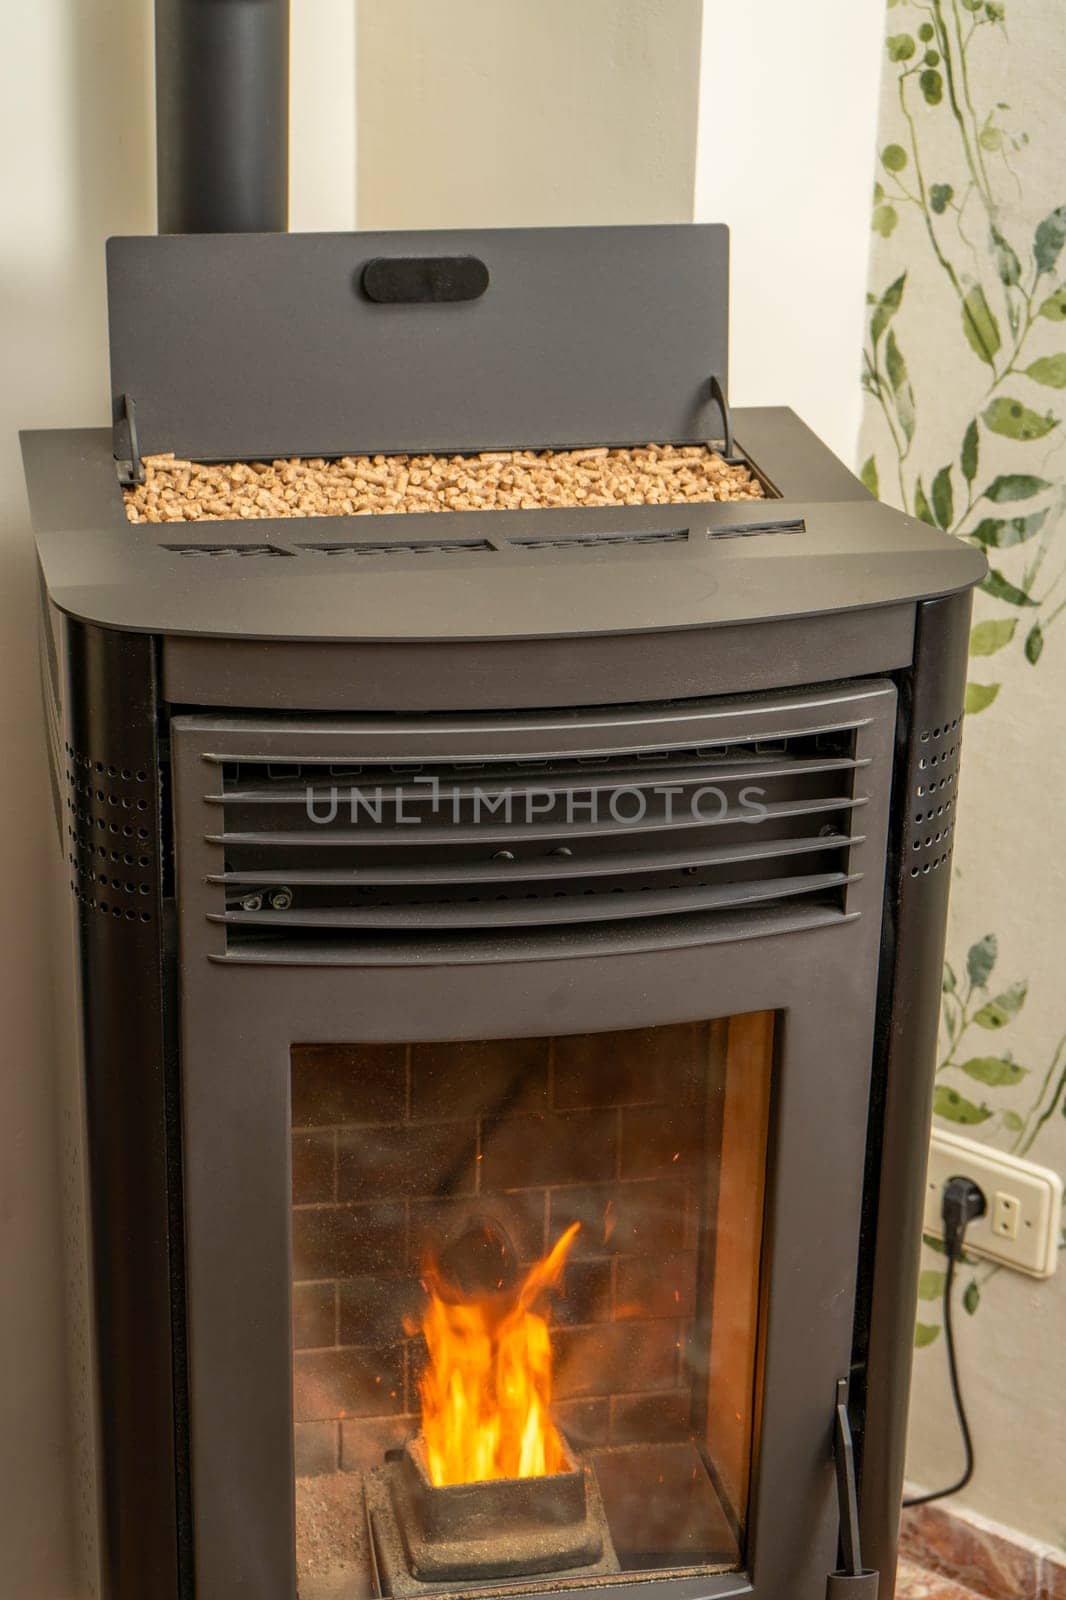 Vertical image of a modern pellet stove with the hopper full to overflowing, ecological and sustainable heat, renewable energy by Barriolo82